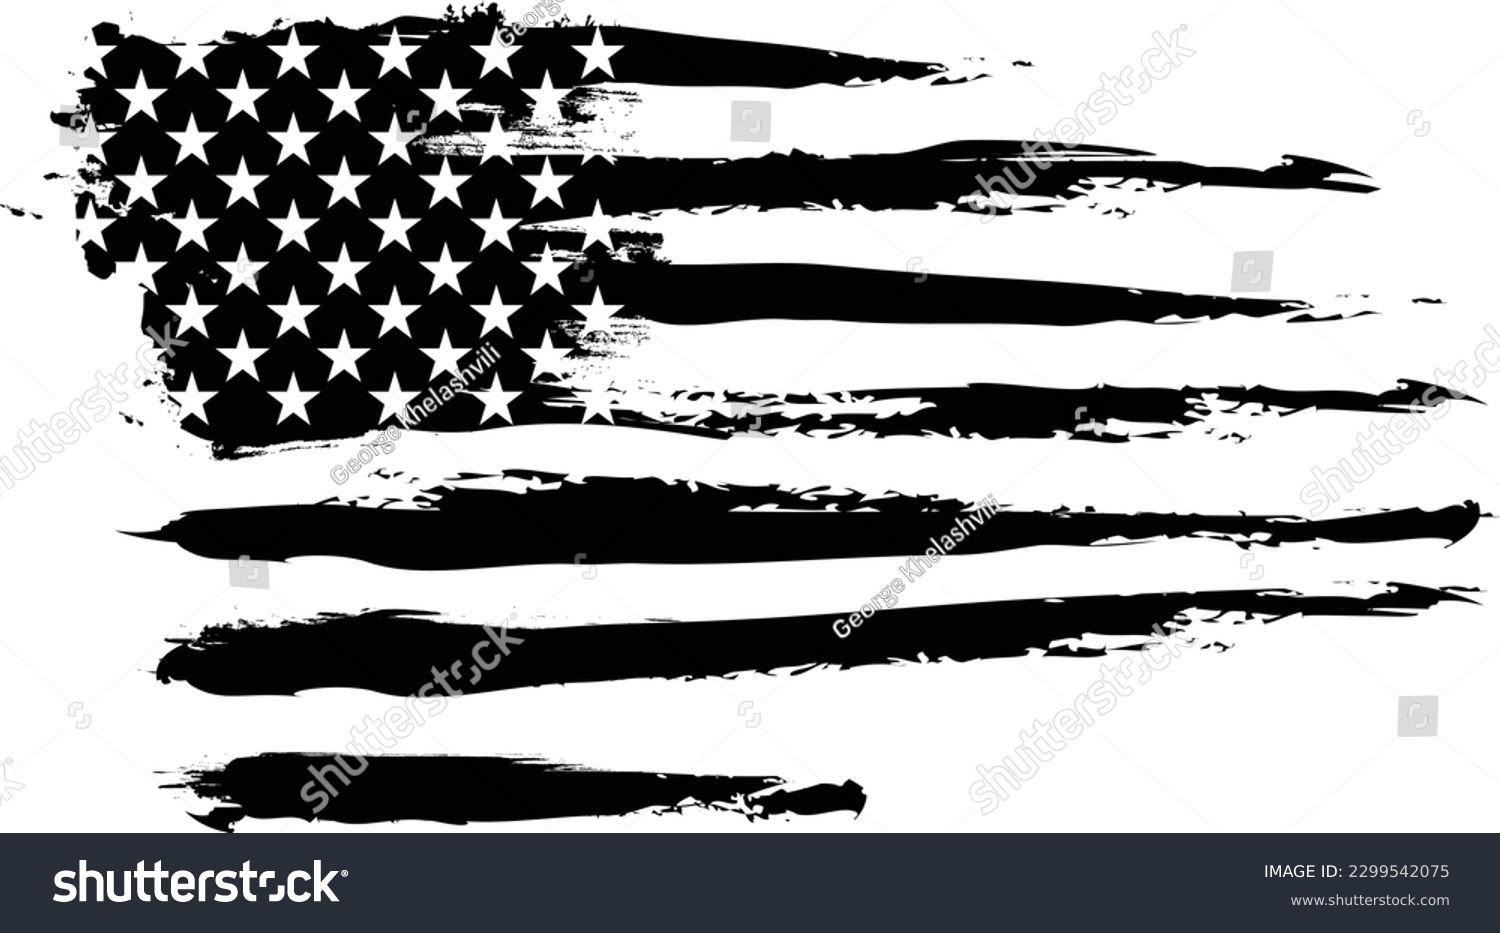 SVG of Vector Of The Distressed American Flag	
 svg